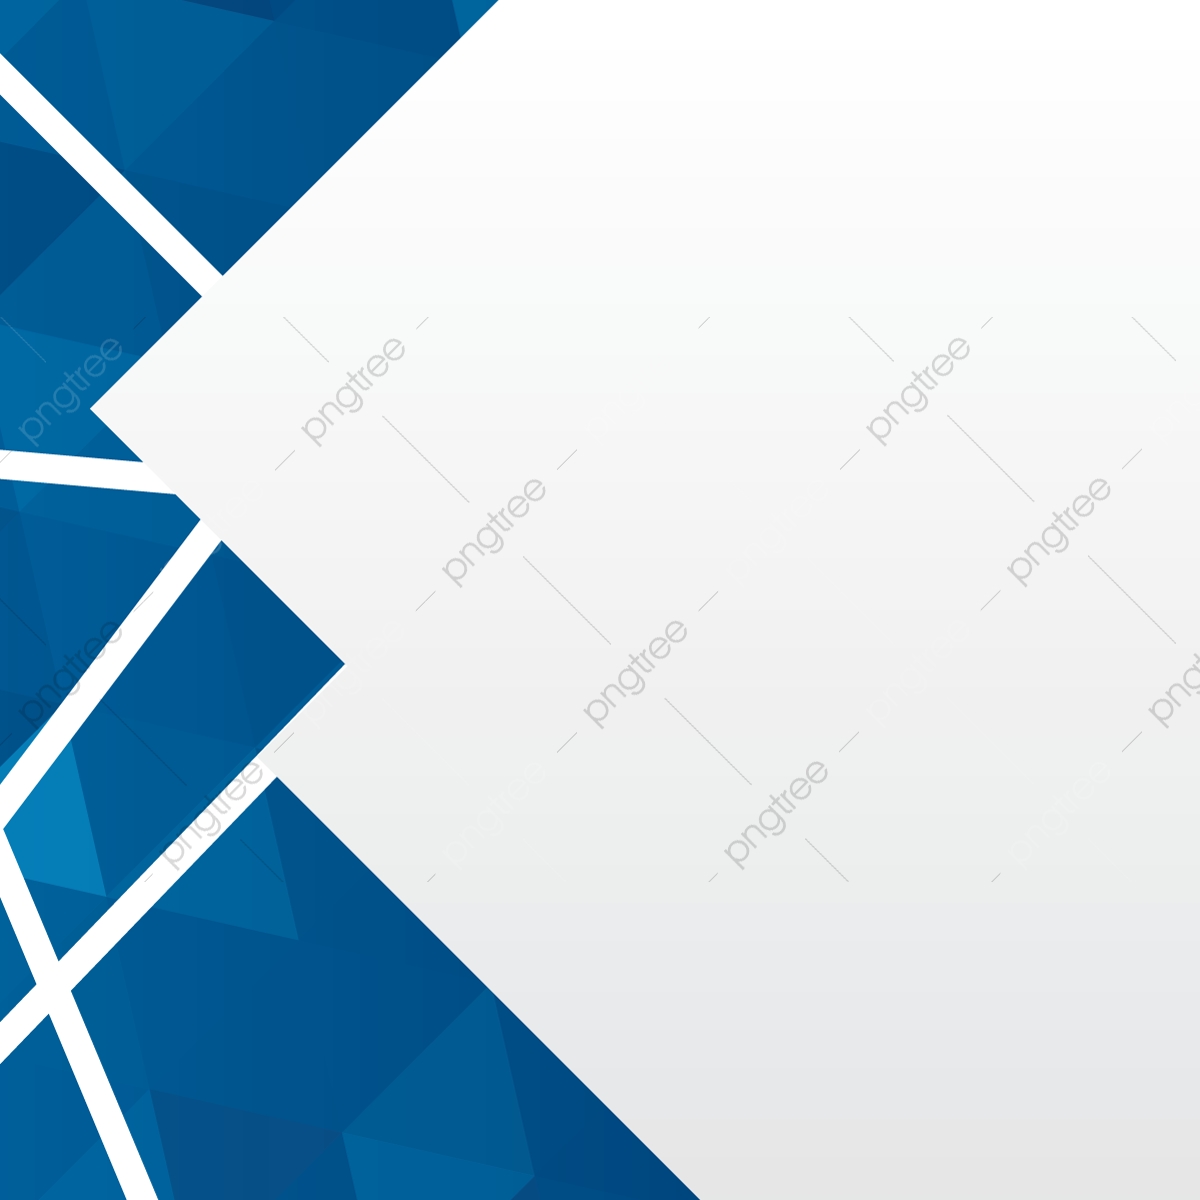 Geometric Backgrounc With Blue Polygons Vector, Azure.